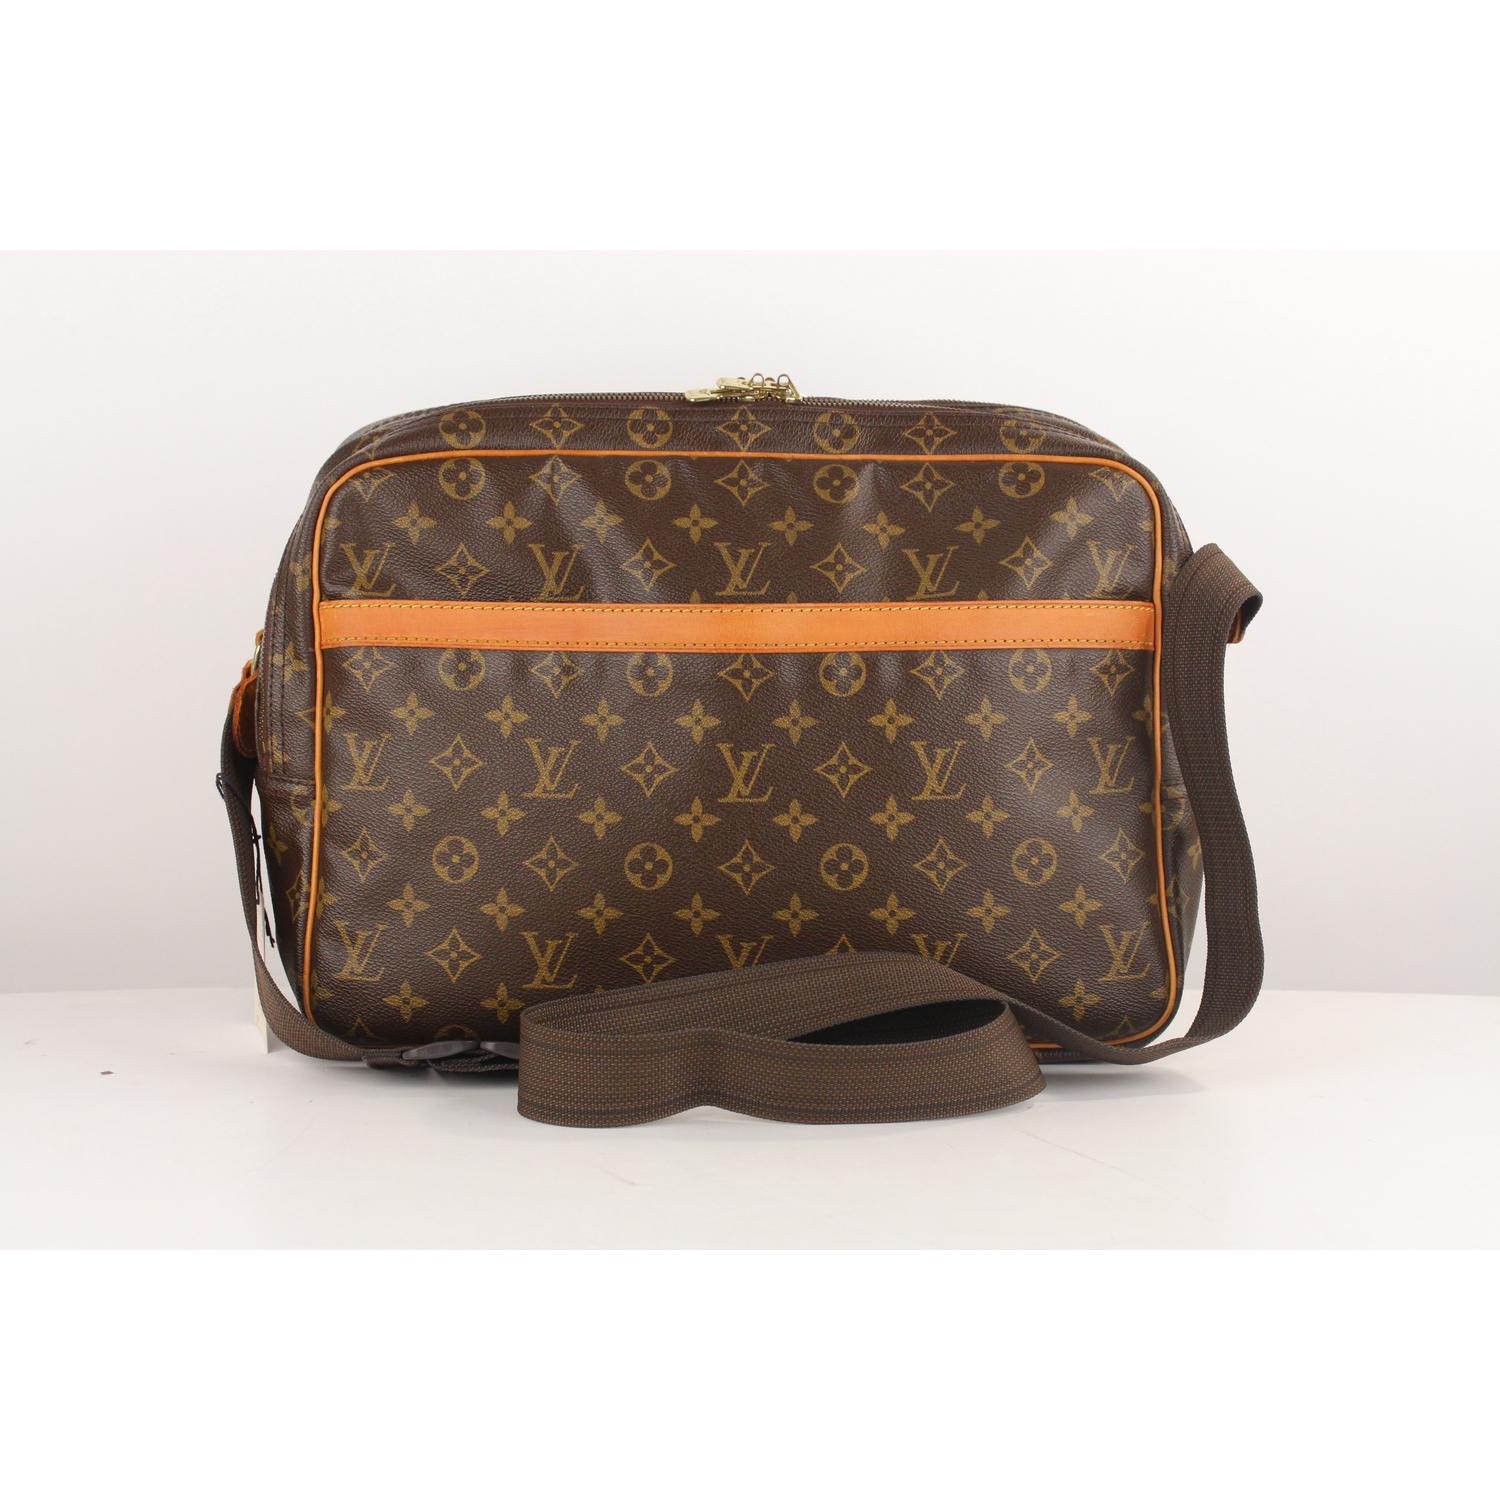 LOUIS VUITTON 'Reporter GM'  carfted in timeless monogram canvas with vachetta leather trim. It features 1 large open pocket on the front. Golden brass hardware and adjstable canvas shoulder strap. 2 main compartments with zip closure. Inside it has